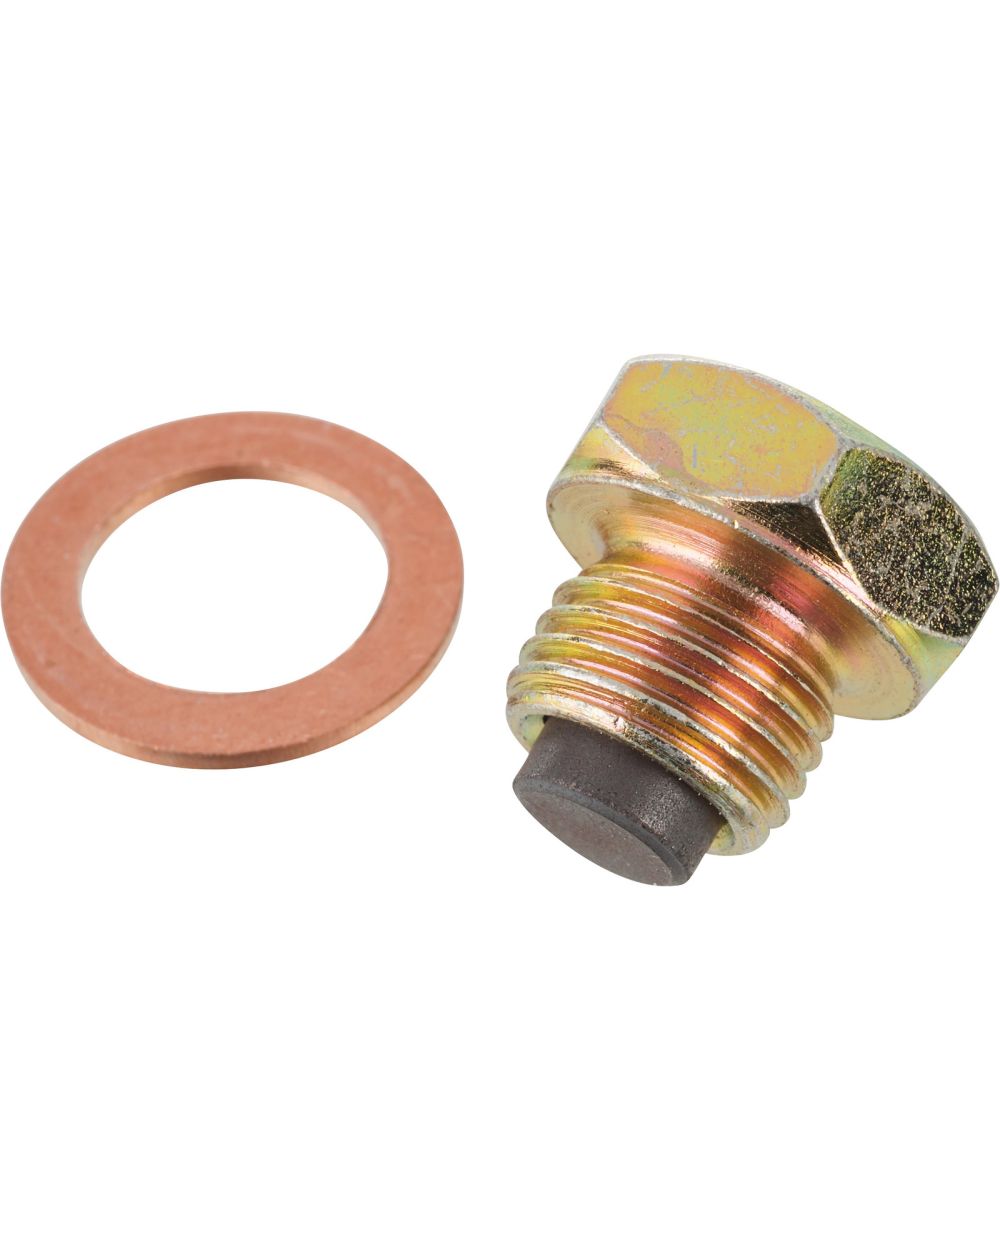 Oil Drain Plug, magnetic, M14x1.5/ A/F19mm incl. gasket, collects the  metallic abrasion bound in the oil at the magnet